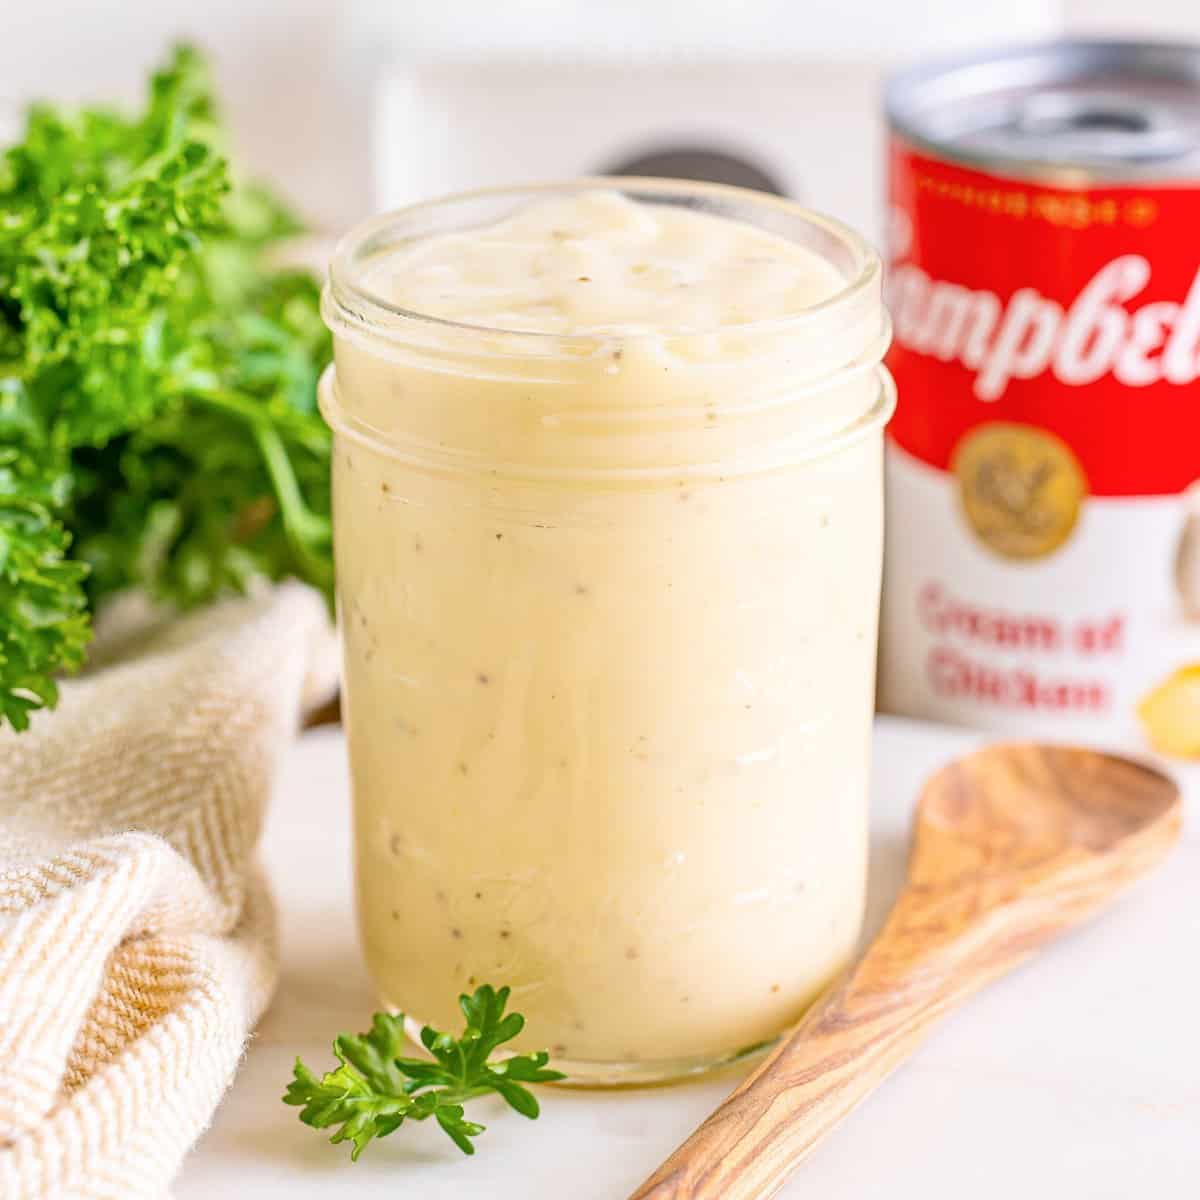 A jar of homemade condensed cream of chicken soup.